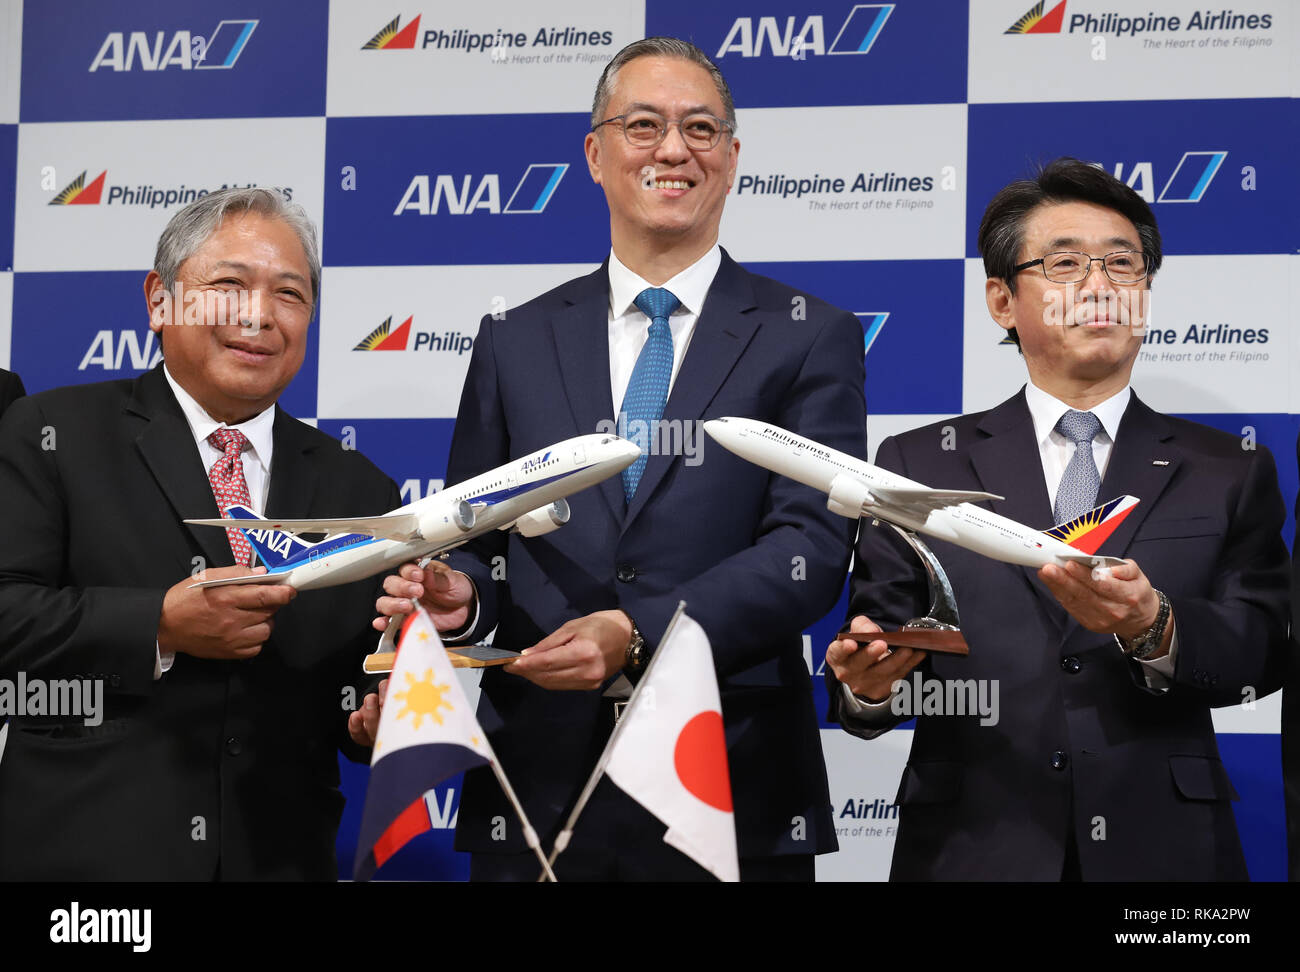 Tokyo, Japan. 8th Feb, 2019. (L-R) Philippine Airlines (PAL) president Jaime Bautista, LT Group president and PAL Holdings director Michael Tan and ANA Holdings president Shinya Katanozaka smile as they announce the companies expand their partnerships in Tokyo on Friday, February 8, 2019. ANA Holdings will invest 95 million U.S. dollars to PAL Holdings and acquire 9.5 percent of PAL Holdings shares. Credit: Yoshio Tsunoda/AFLO/Alamy Live News Stock Photo